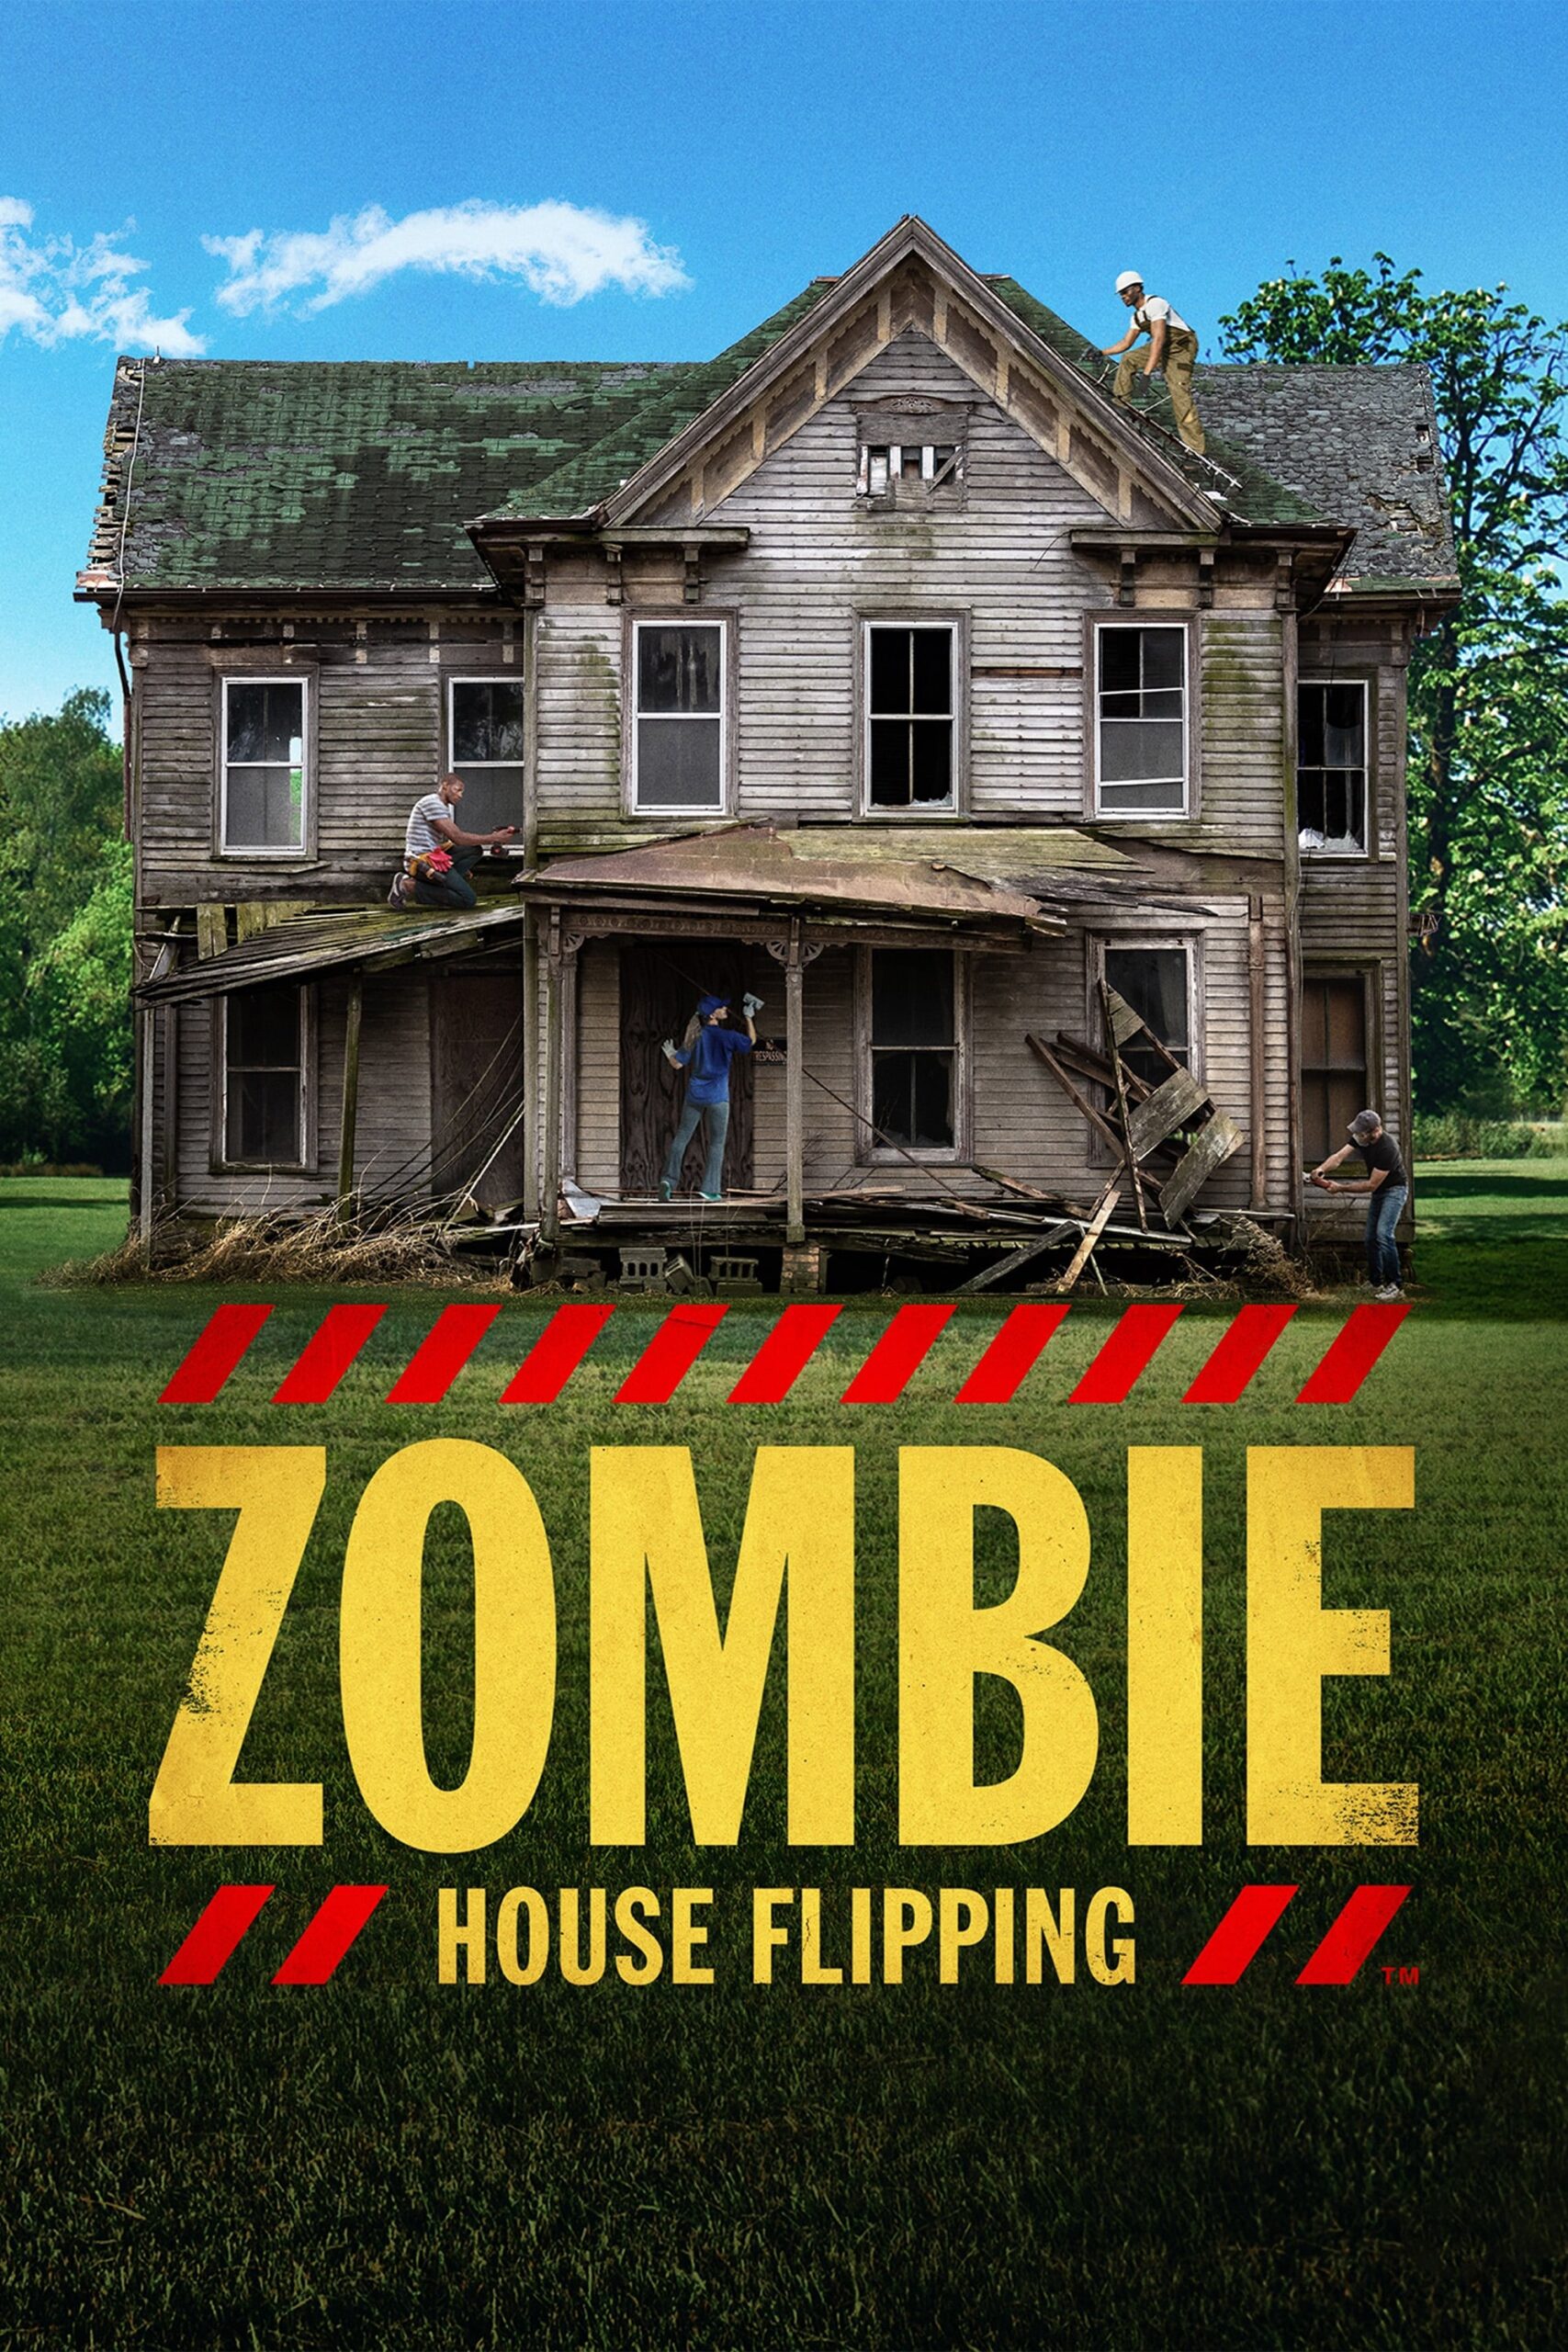 Zombie House Flipping poster